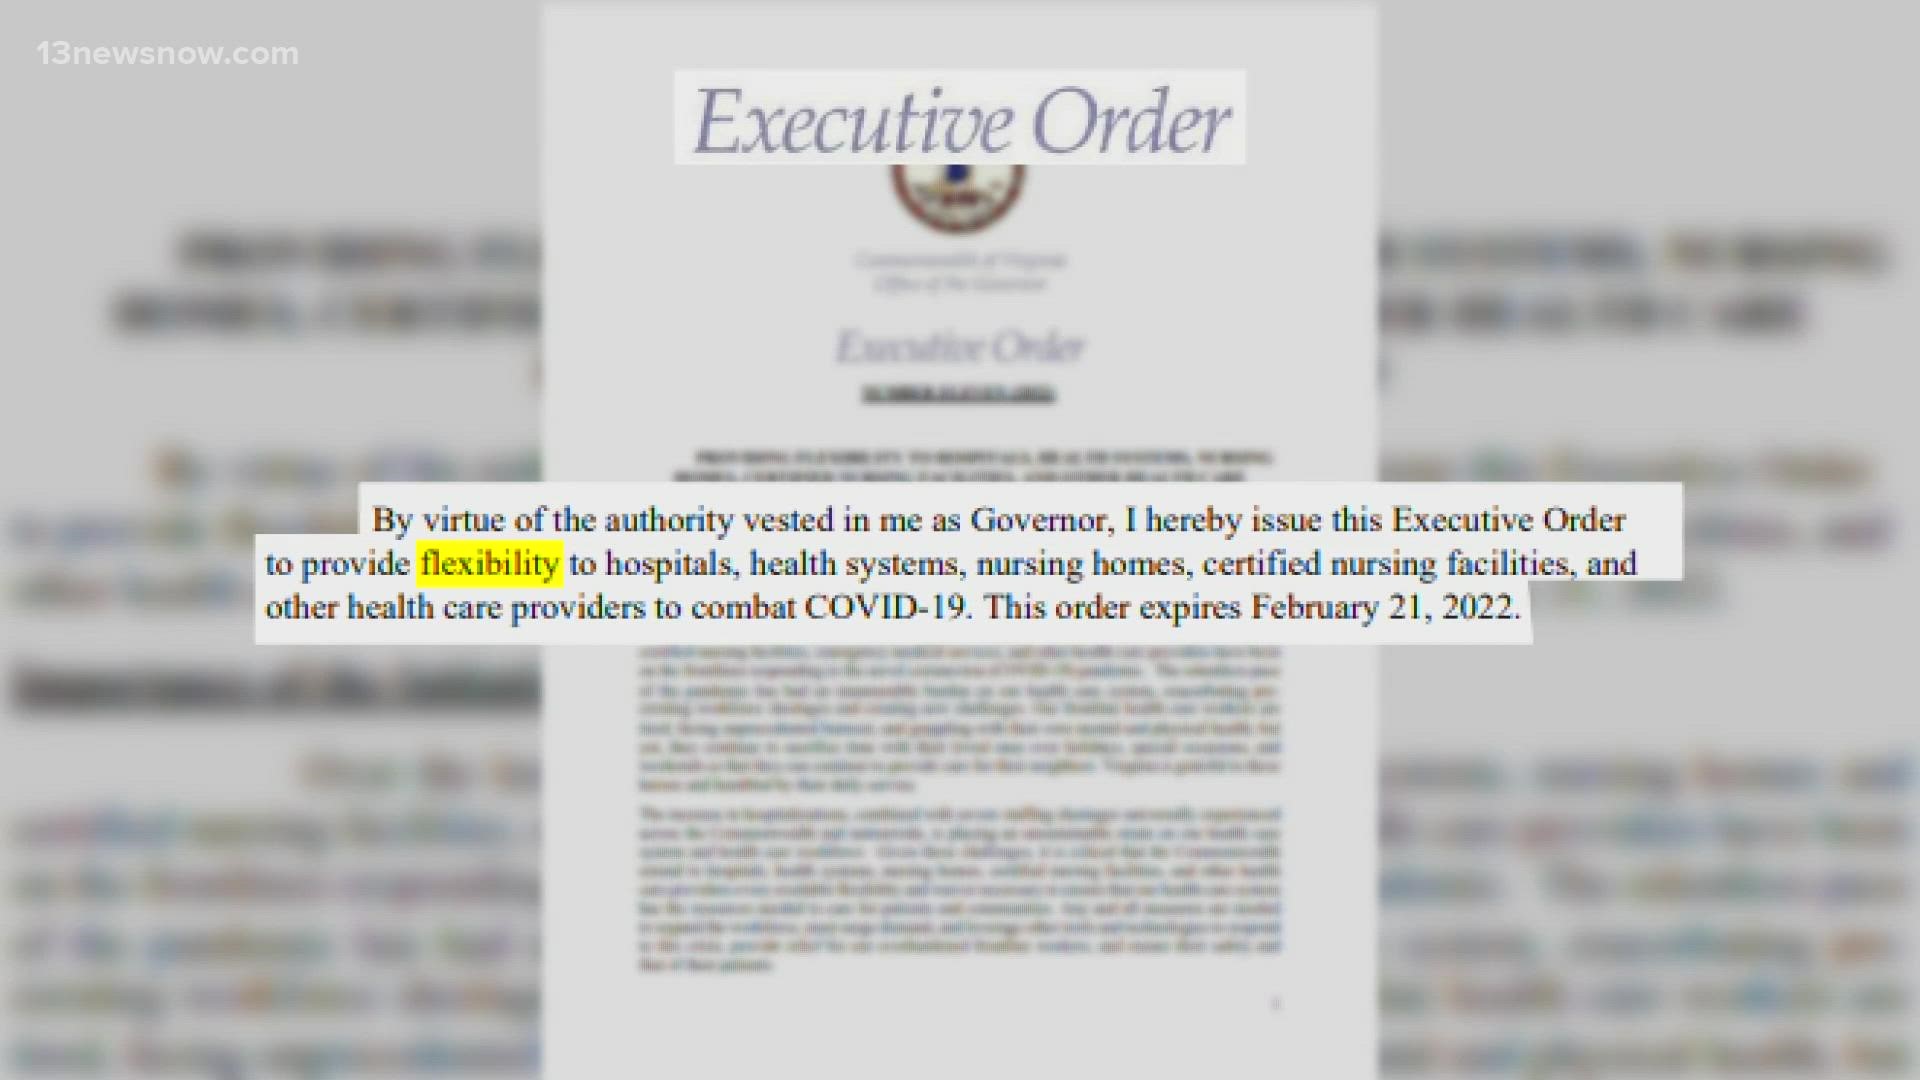 Executive Order 16 helps hospitals tackle staffing, patient care issues and more. It will last until March 2022.